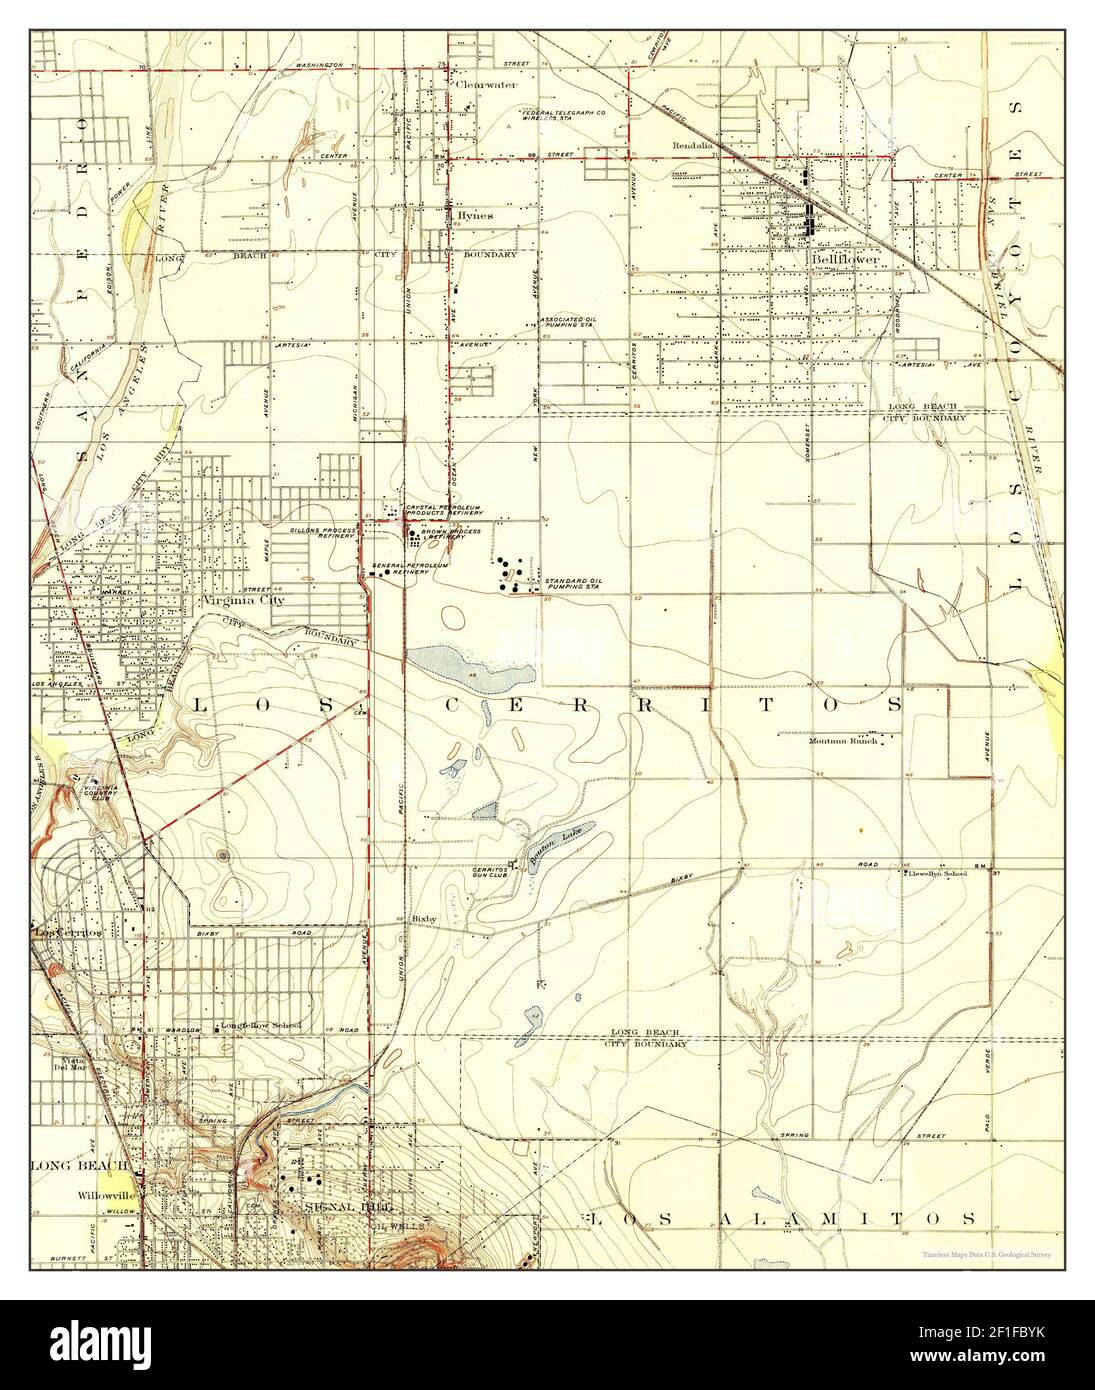 Clearwater, California, map 1925, 1:24000, United States of America by Timeless Maps, data U.S. Geological Survey Stock Photo